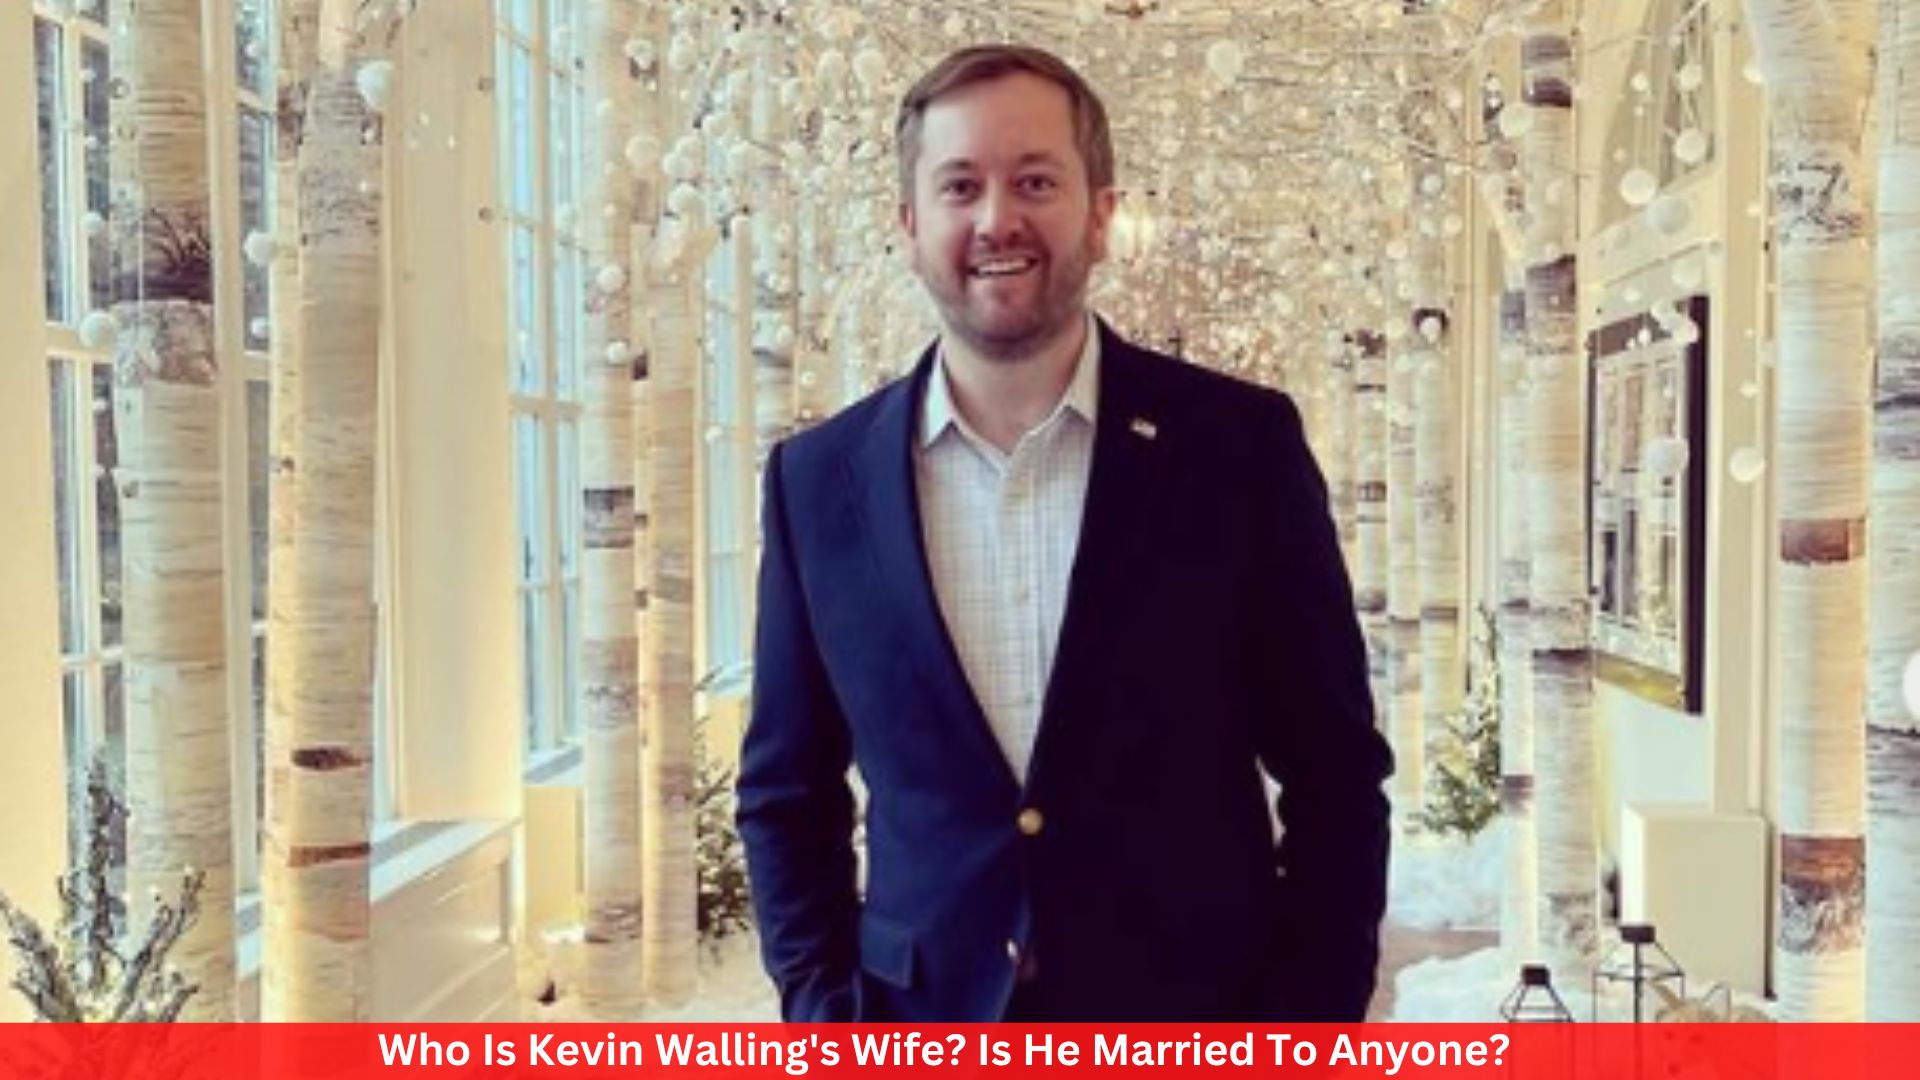 Who Is Kevin Walling's Wife? Is He Married To Anyone?